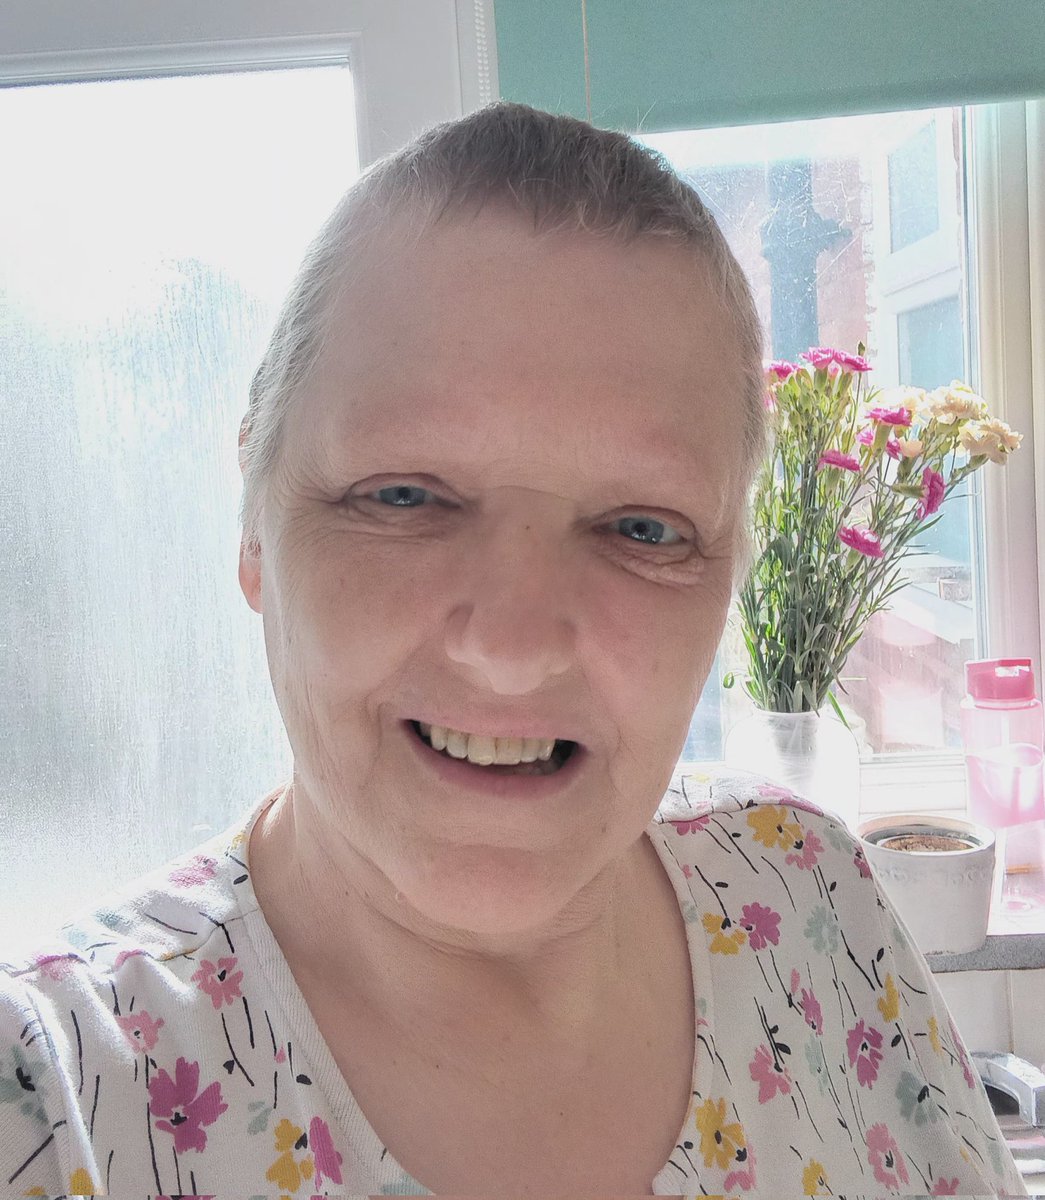 Just a bit of an update, I am home, and covid test is finally negative. I'm feeling much better than of late. I just need to build my strength back up. Have a fantastic Sunday, and enjoy the beautiful weather 🥰🥰🥰🫠#positivevibesonly #enjoylife #cancerawareness #covidsucks